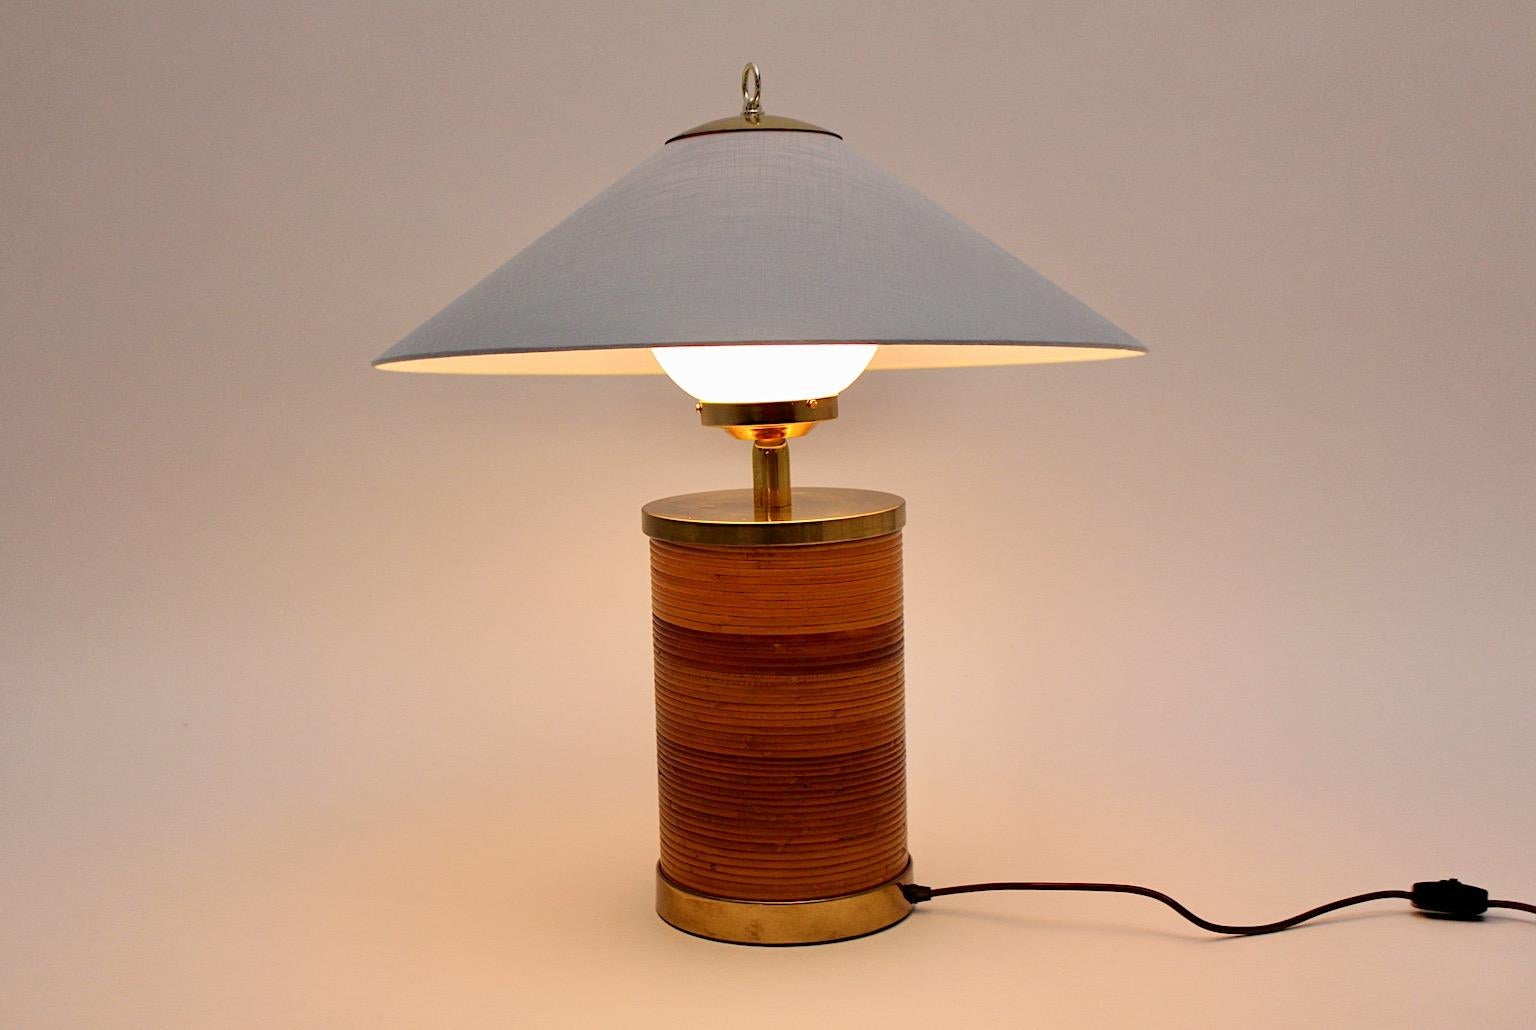 Hollywood Regency style vintage table lamp from rattan and brass with a new made lamp shade from textile fabric in pastel blue color tone, designed in the golden age of Italian design 1970s.
The powerful mix between rattan and brass makes the table